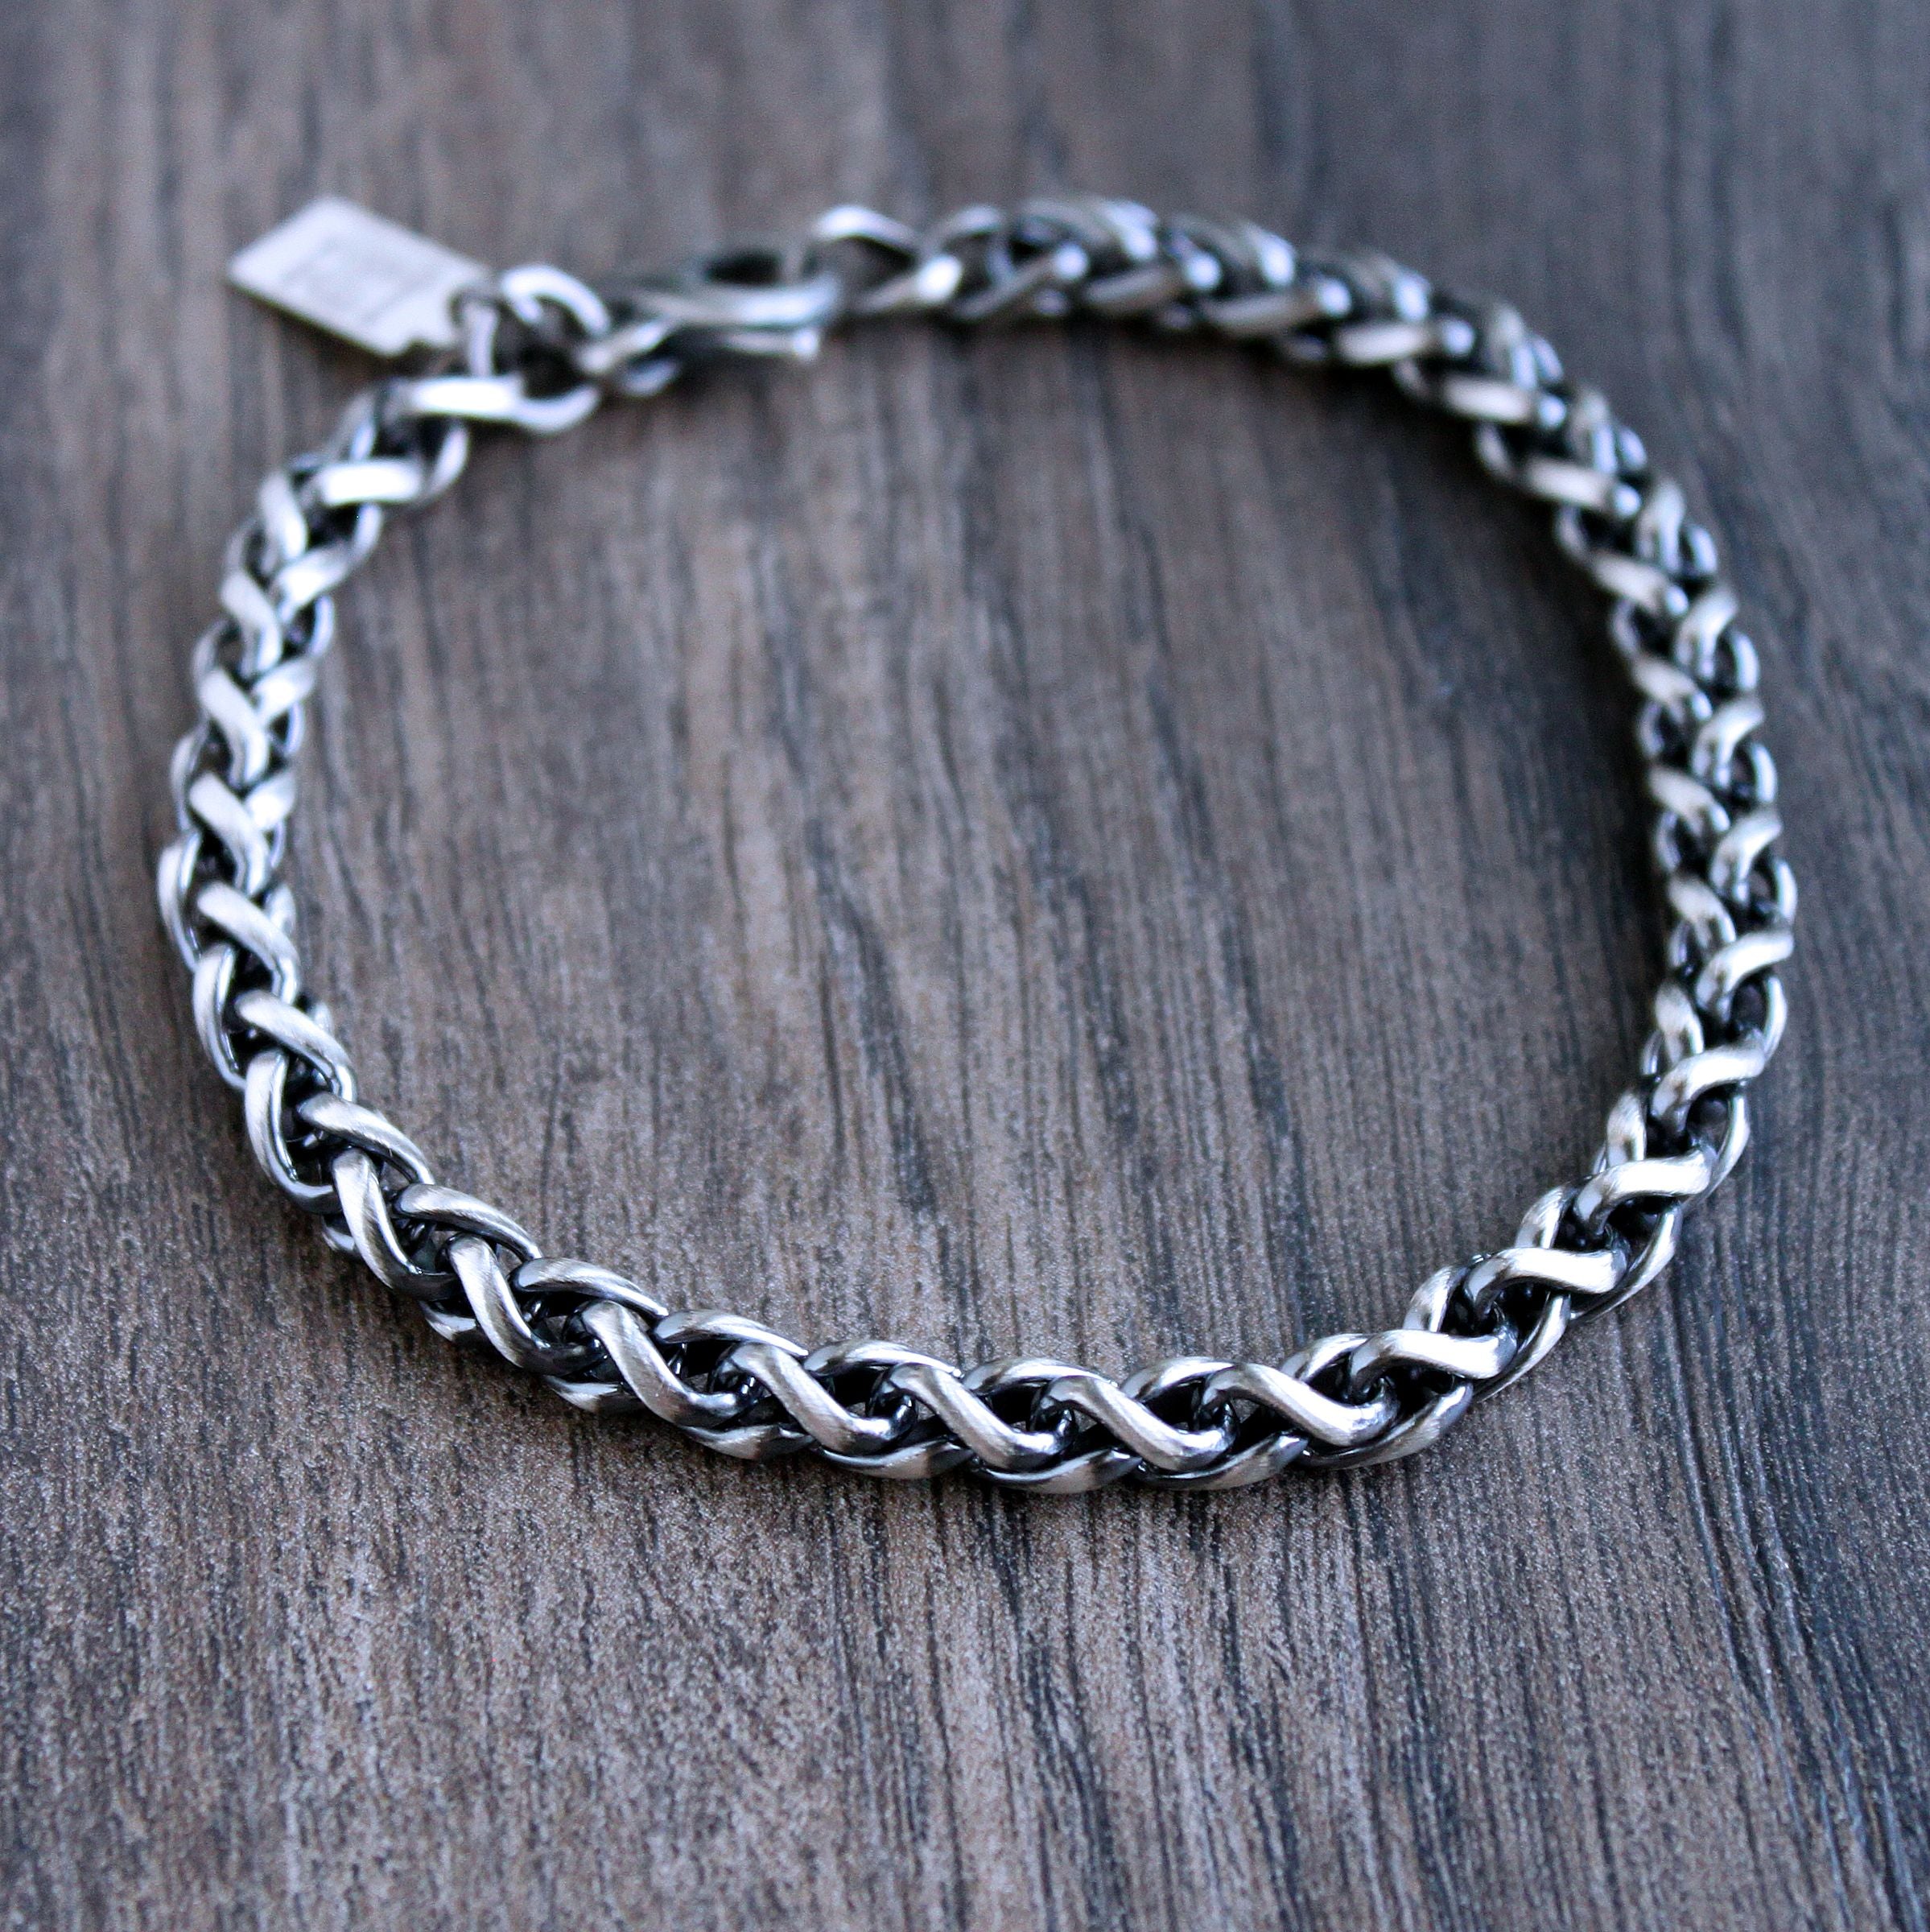 Casual Wear Men 925 Oxidized Silver Bracelet, 30gram, Size: 8.5 Inch  (length) at Rs 3000/piece in Mumbai